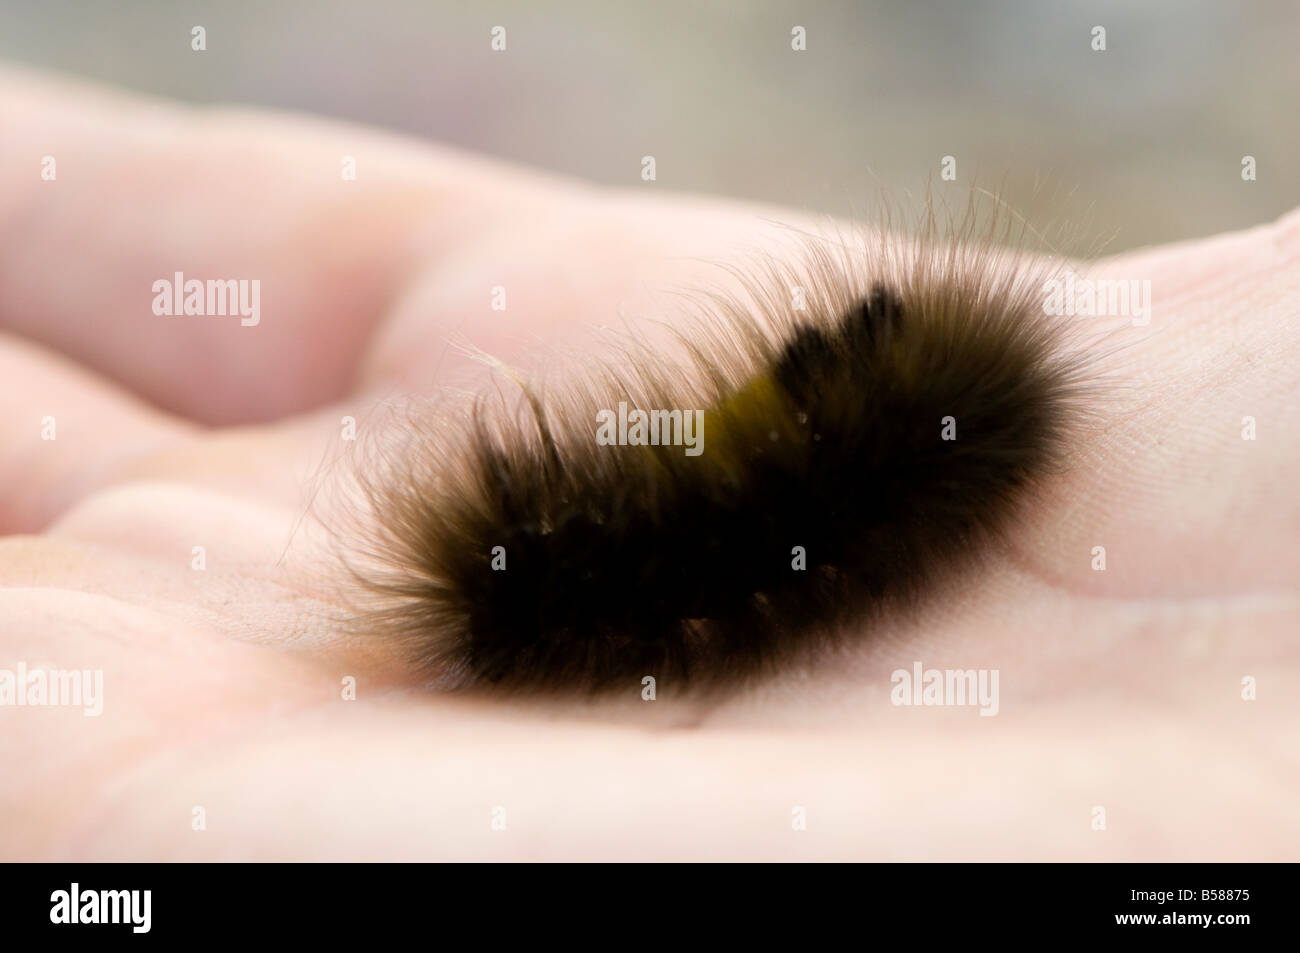 ARctic wooly woolly bear caterpillar lives to be 14 years old as a caterpillar freezing solid for ten months of the year Stock Photo